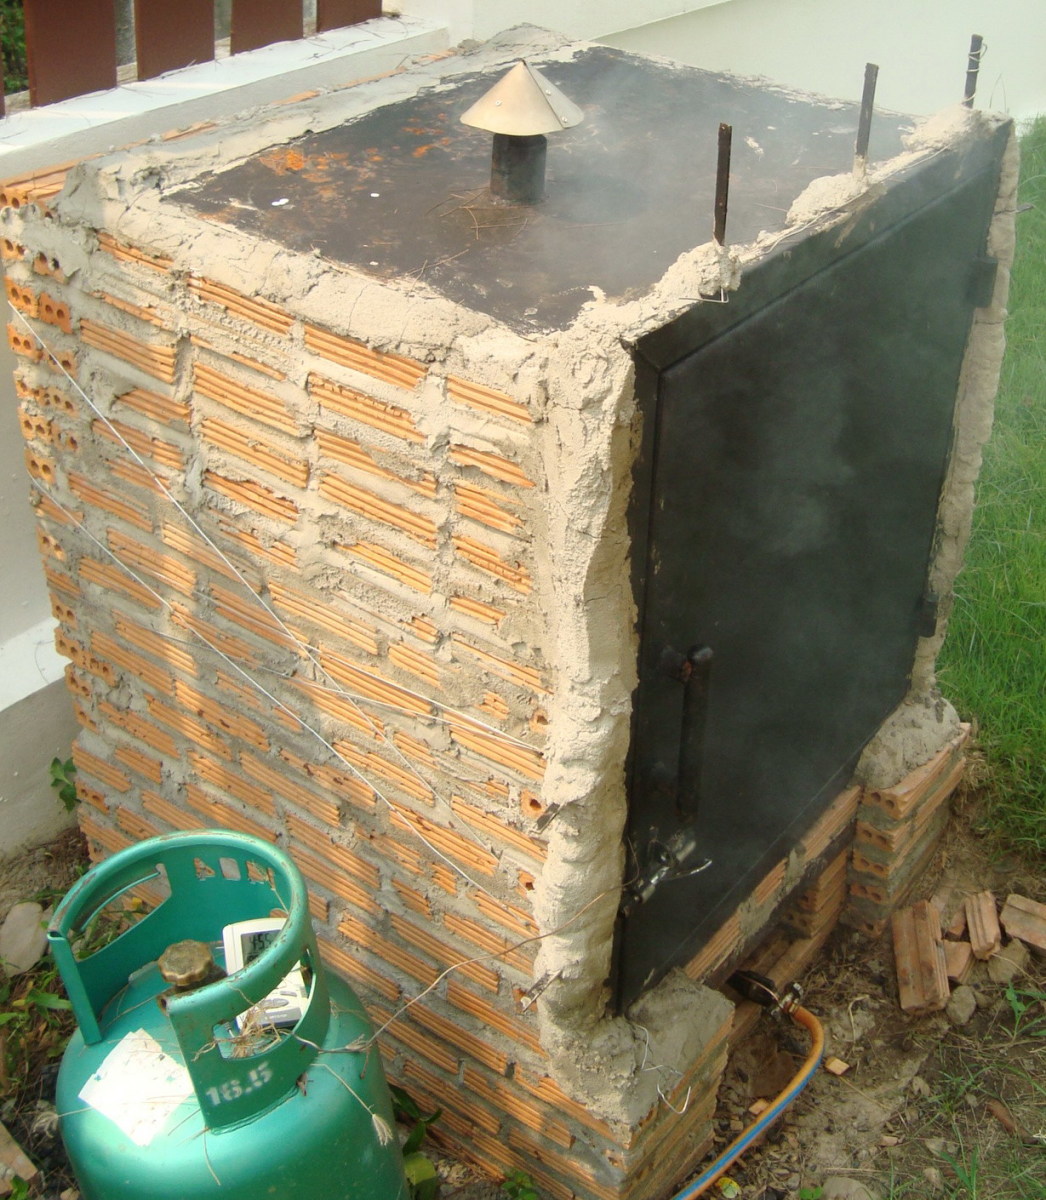 How To Build A Brick Bbq Smoker Dengarden, Building An Outdoor Smoker And Grill